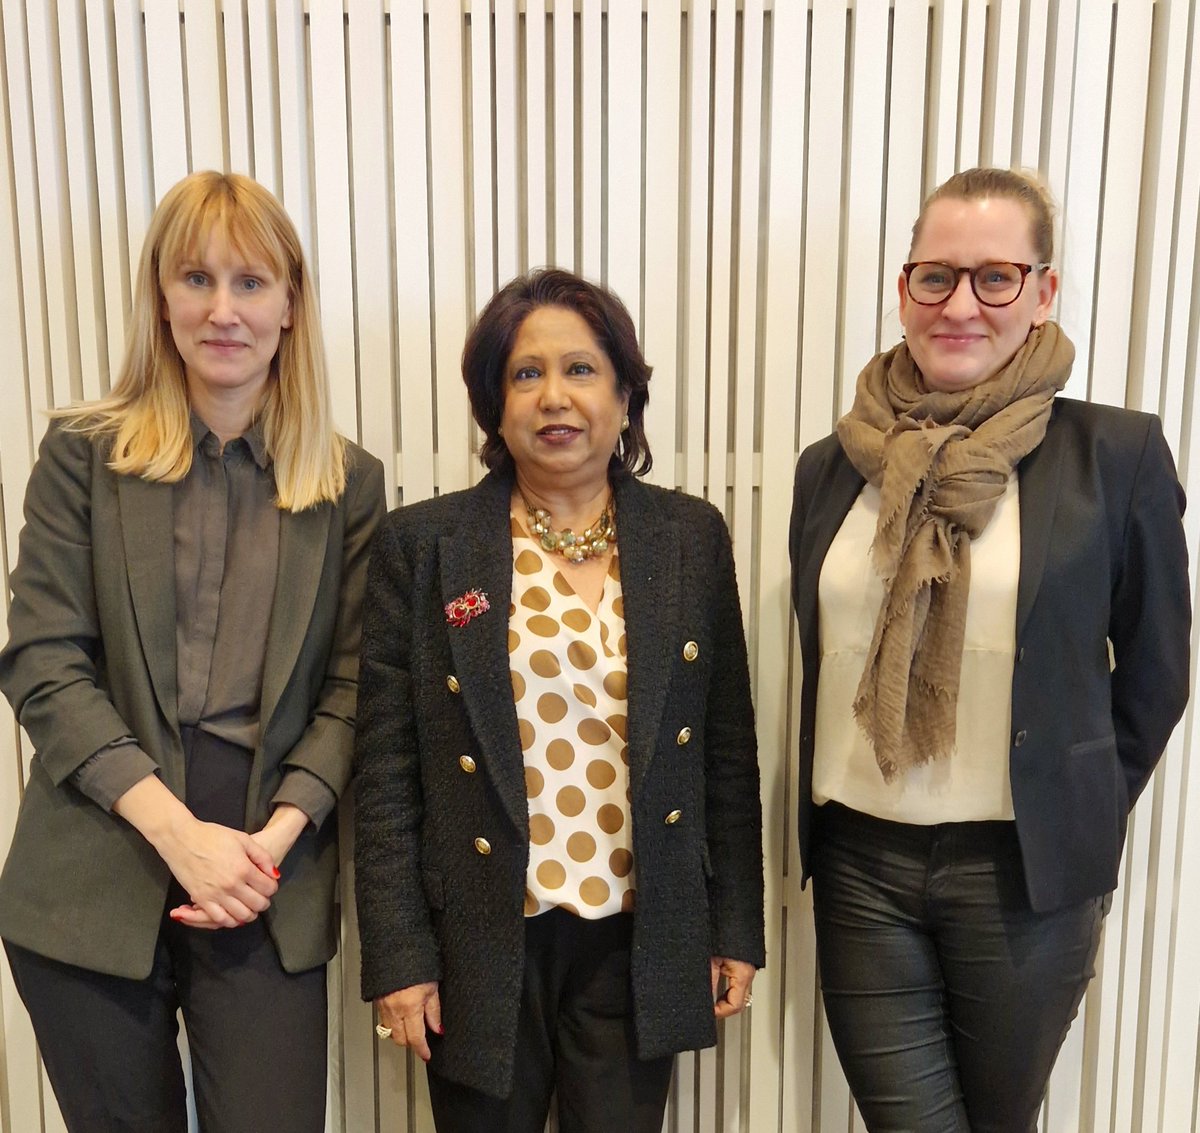 Thank you @USGSRSGPatten and @SweMFA for an important exchange on trends and challanges in the work against Conflict Related Sexual Violence #CRSV. We @KvinnaKvinnaINT look forward to future dialogue and cooperation.